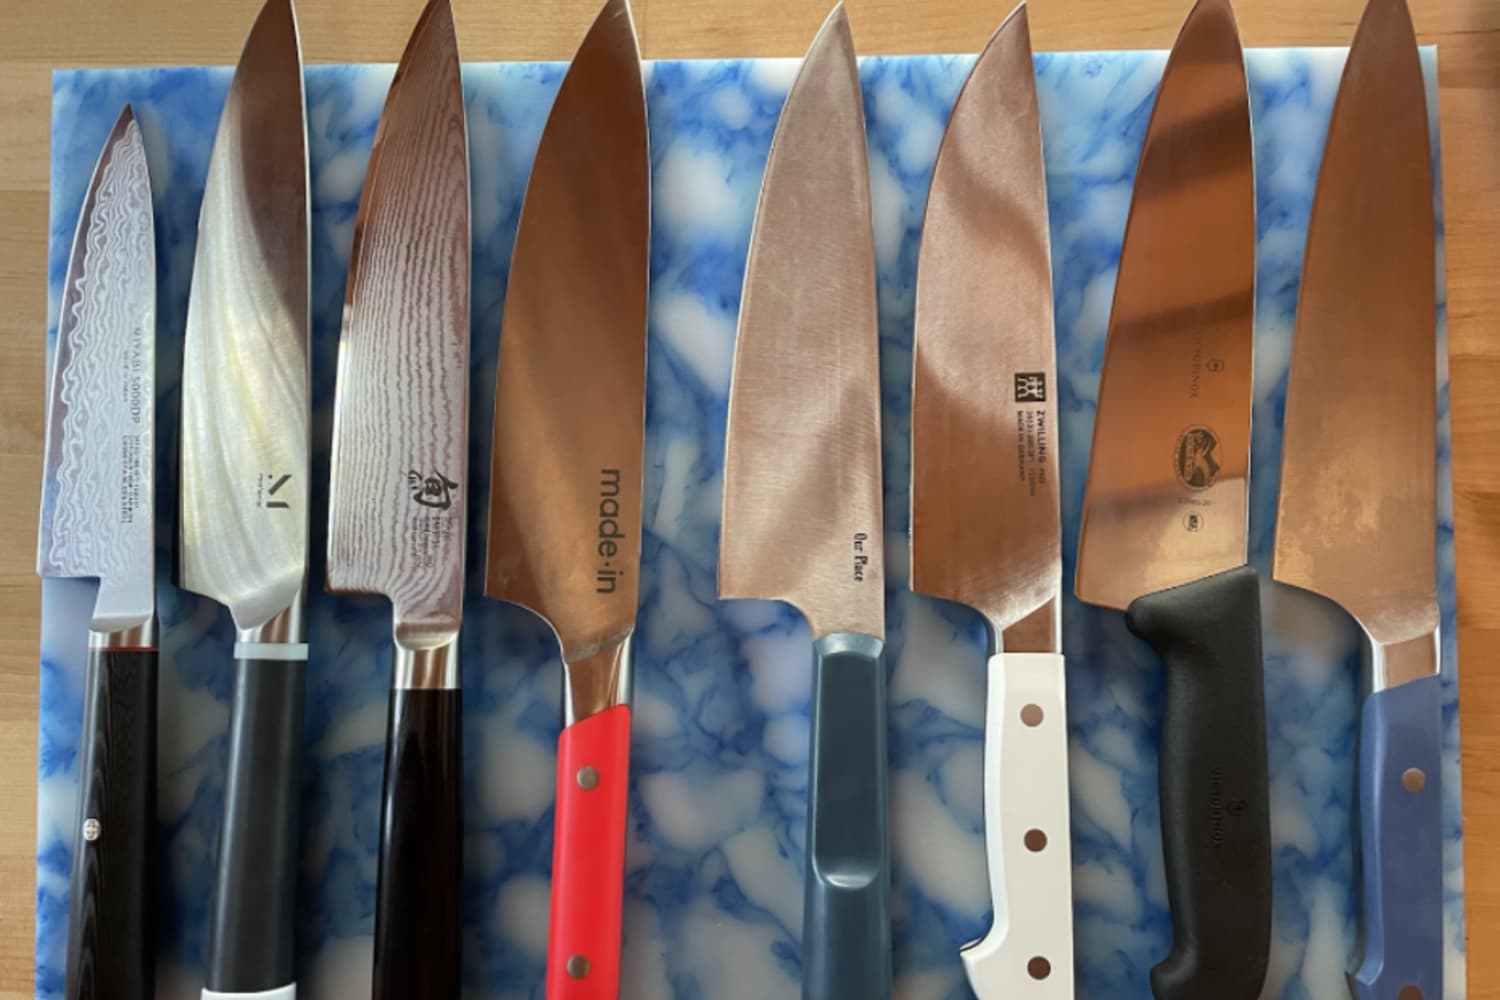 The Best Chef's Knives to Buy in 2023